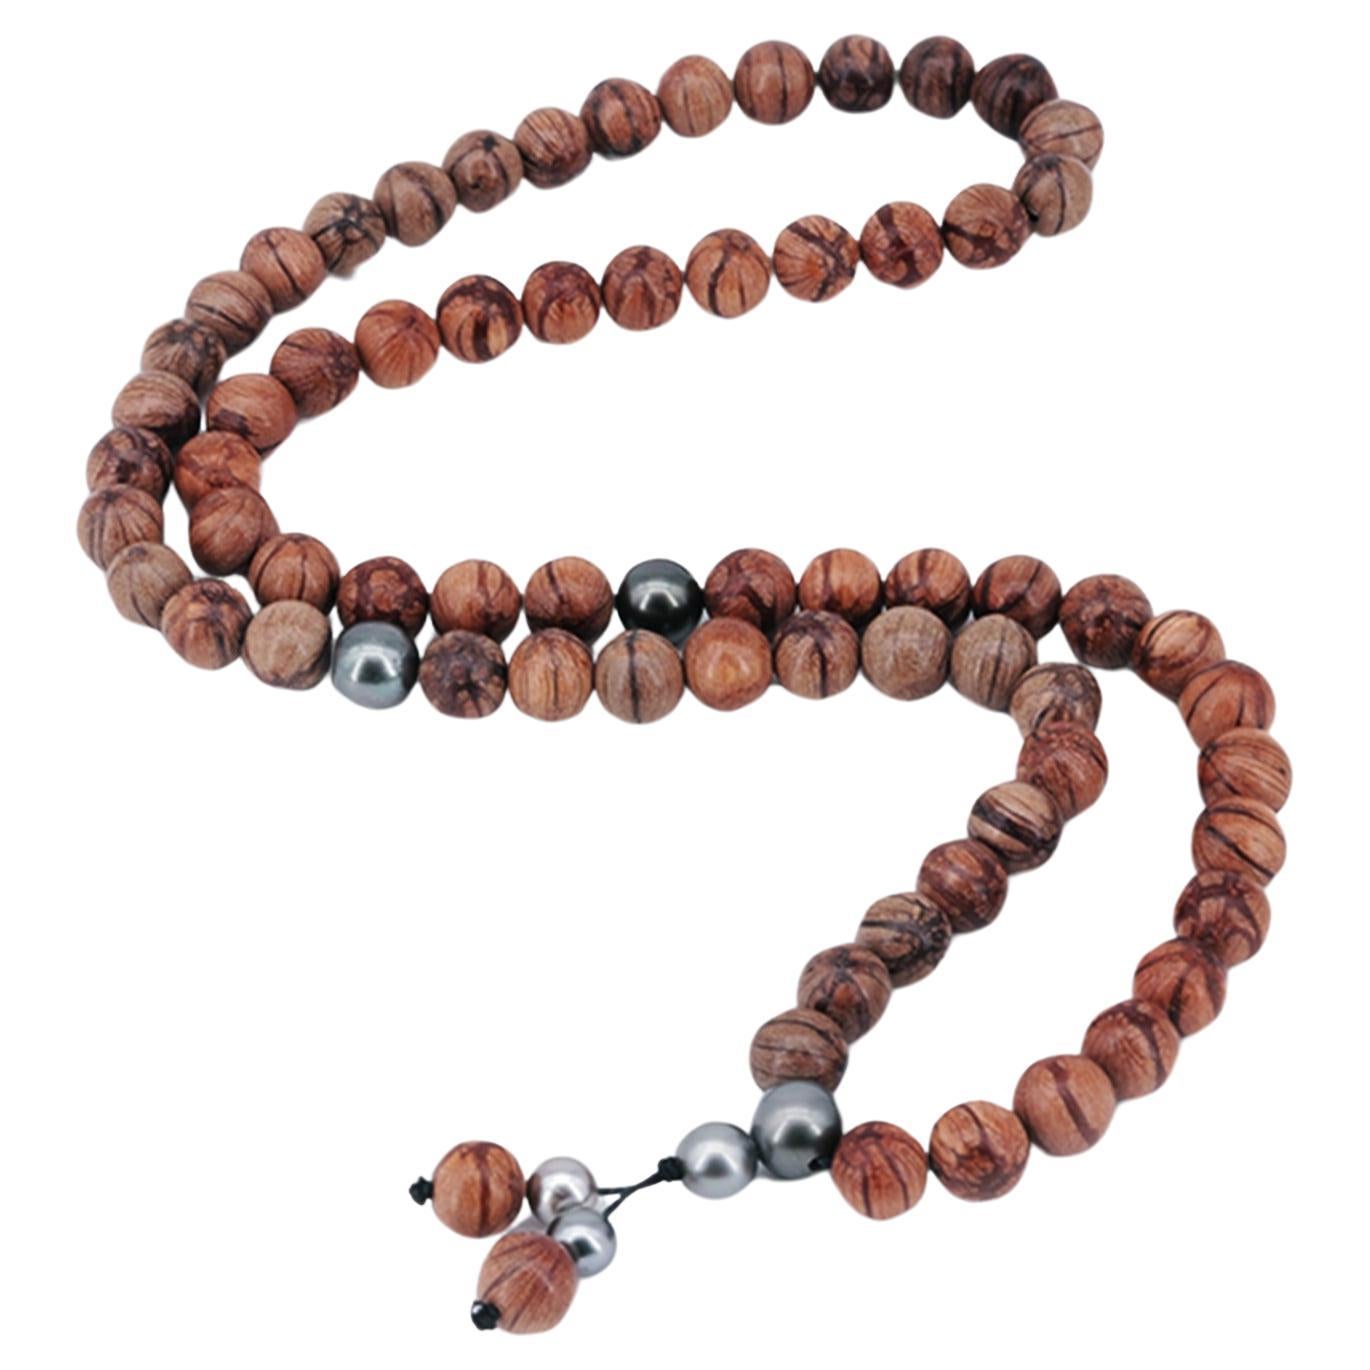 Long Necklace with large Tahiti pearls and Rosewood beads for Men